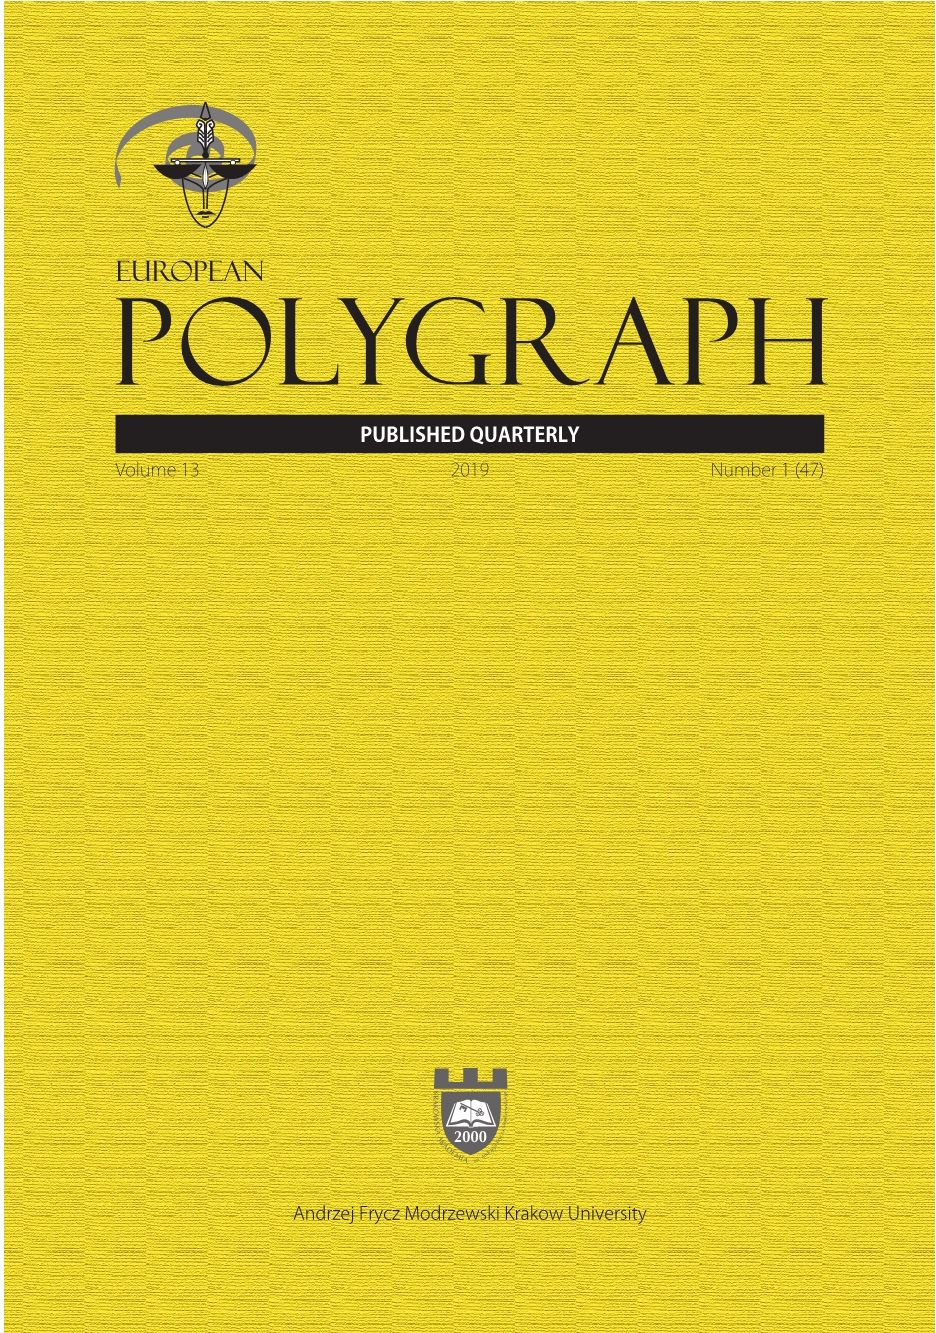 Chicago: Where Polygraph Becomes a Science Cover Image